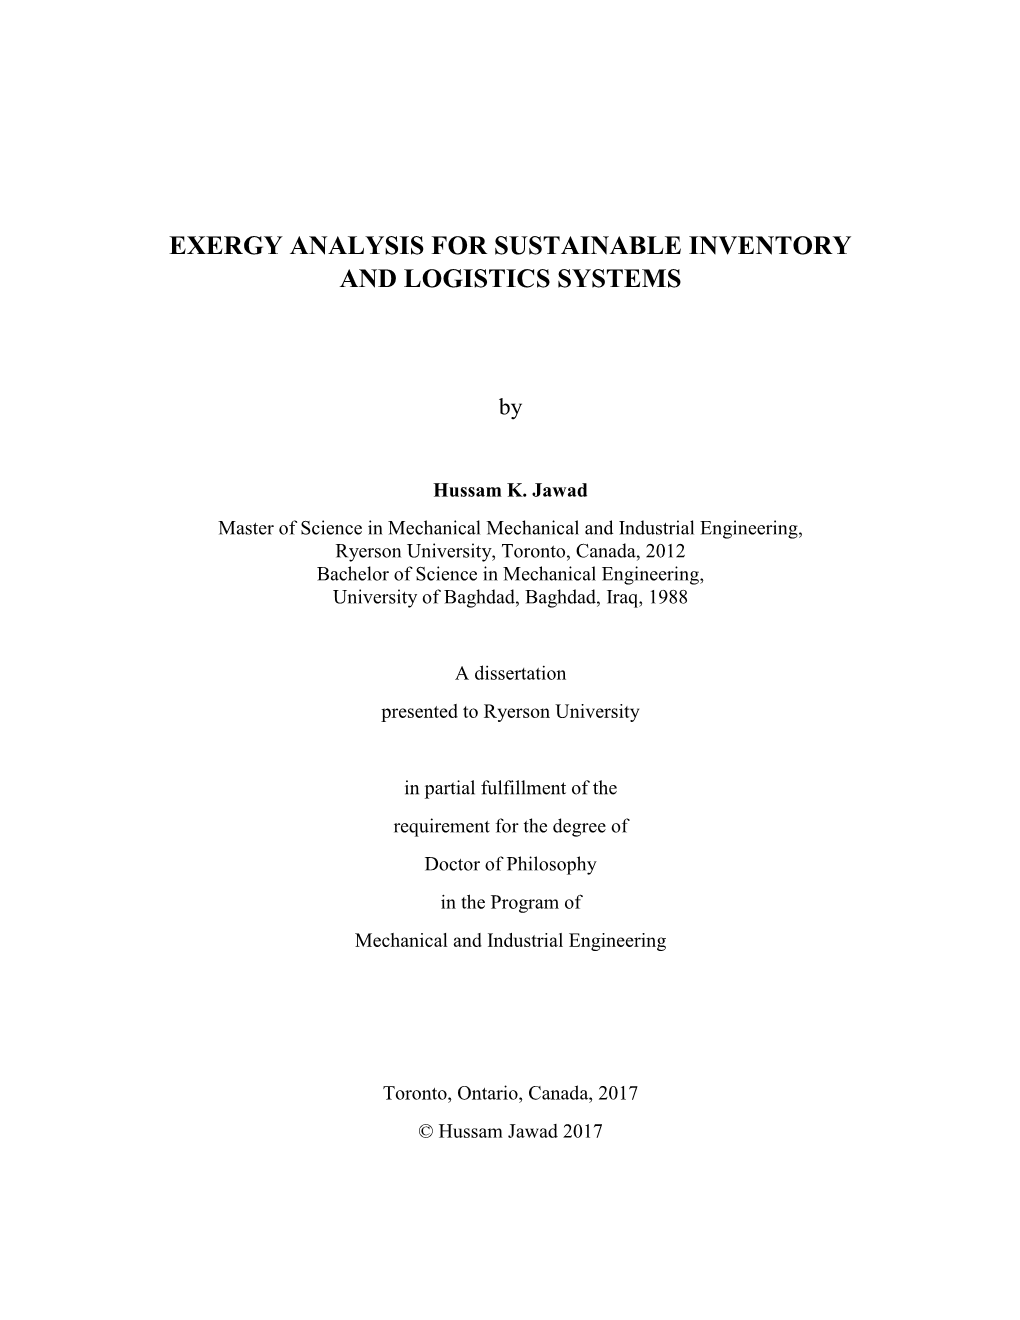 Exergy Analysis for Sustainable Inventory and Logistics Systems